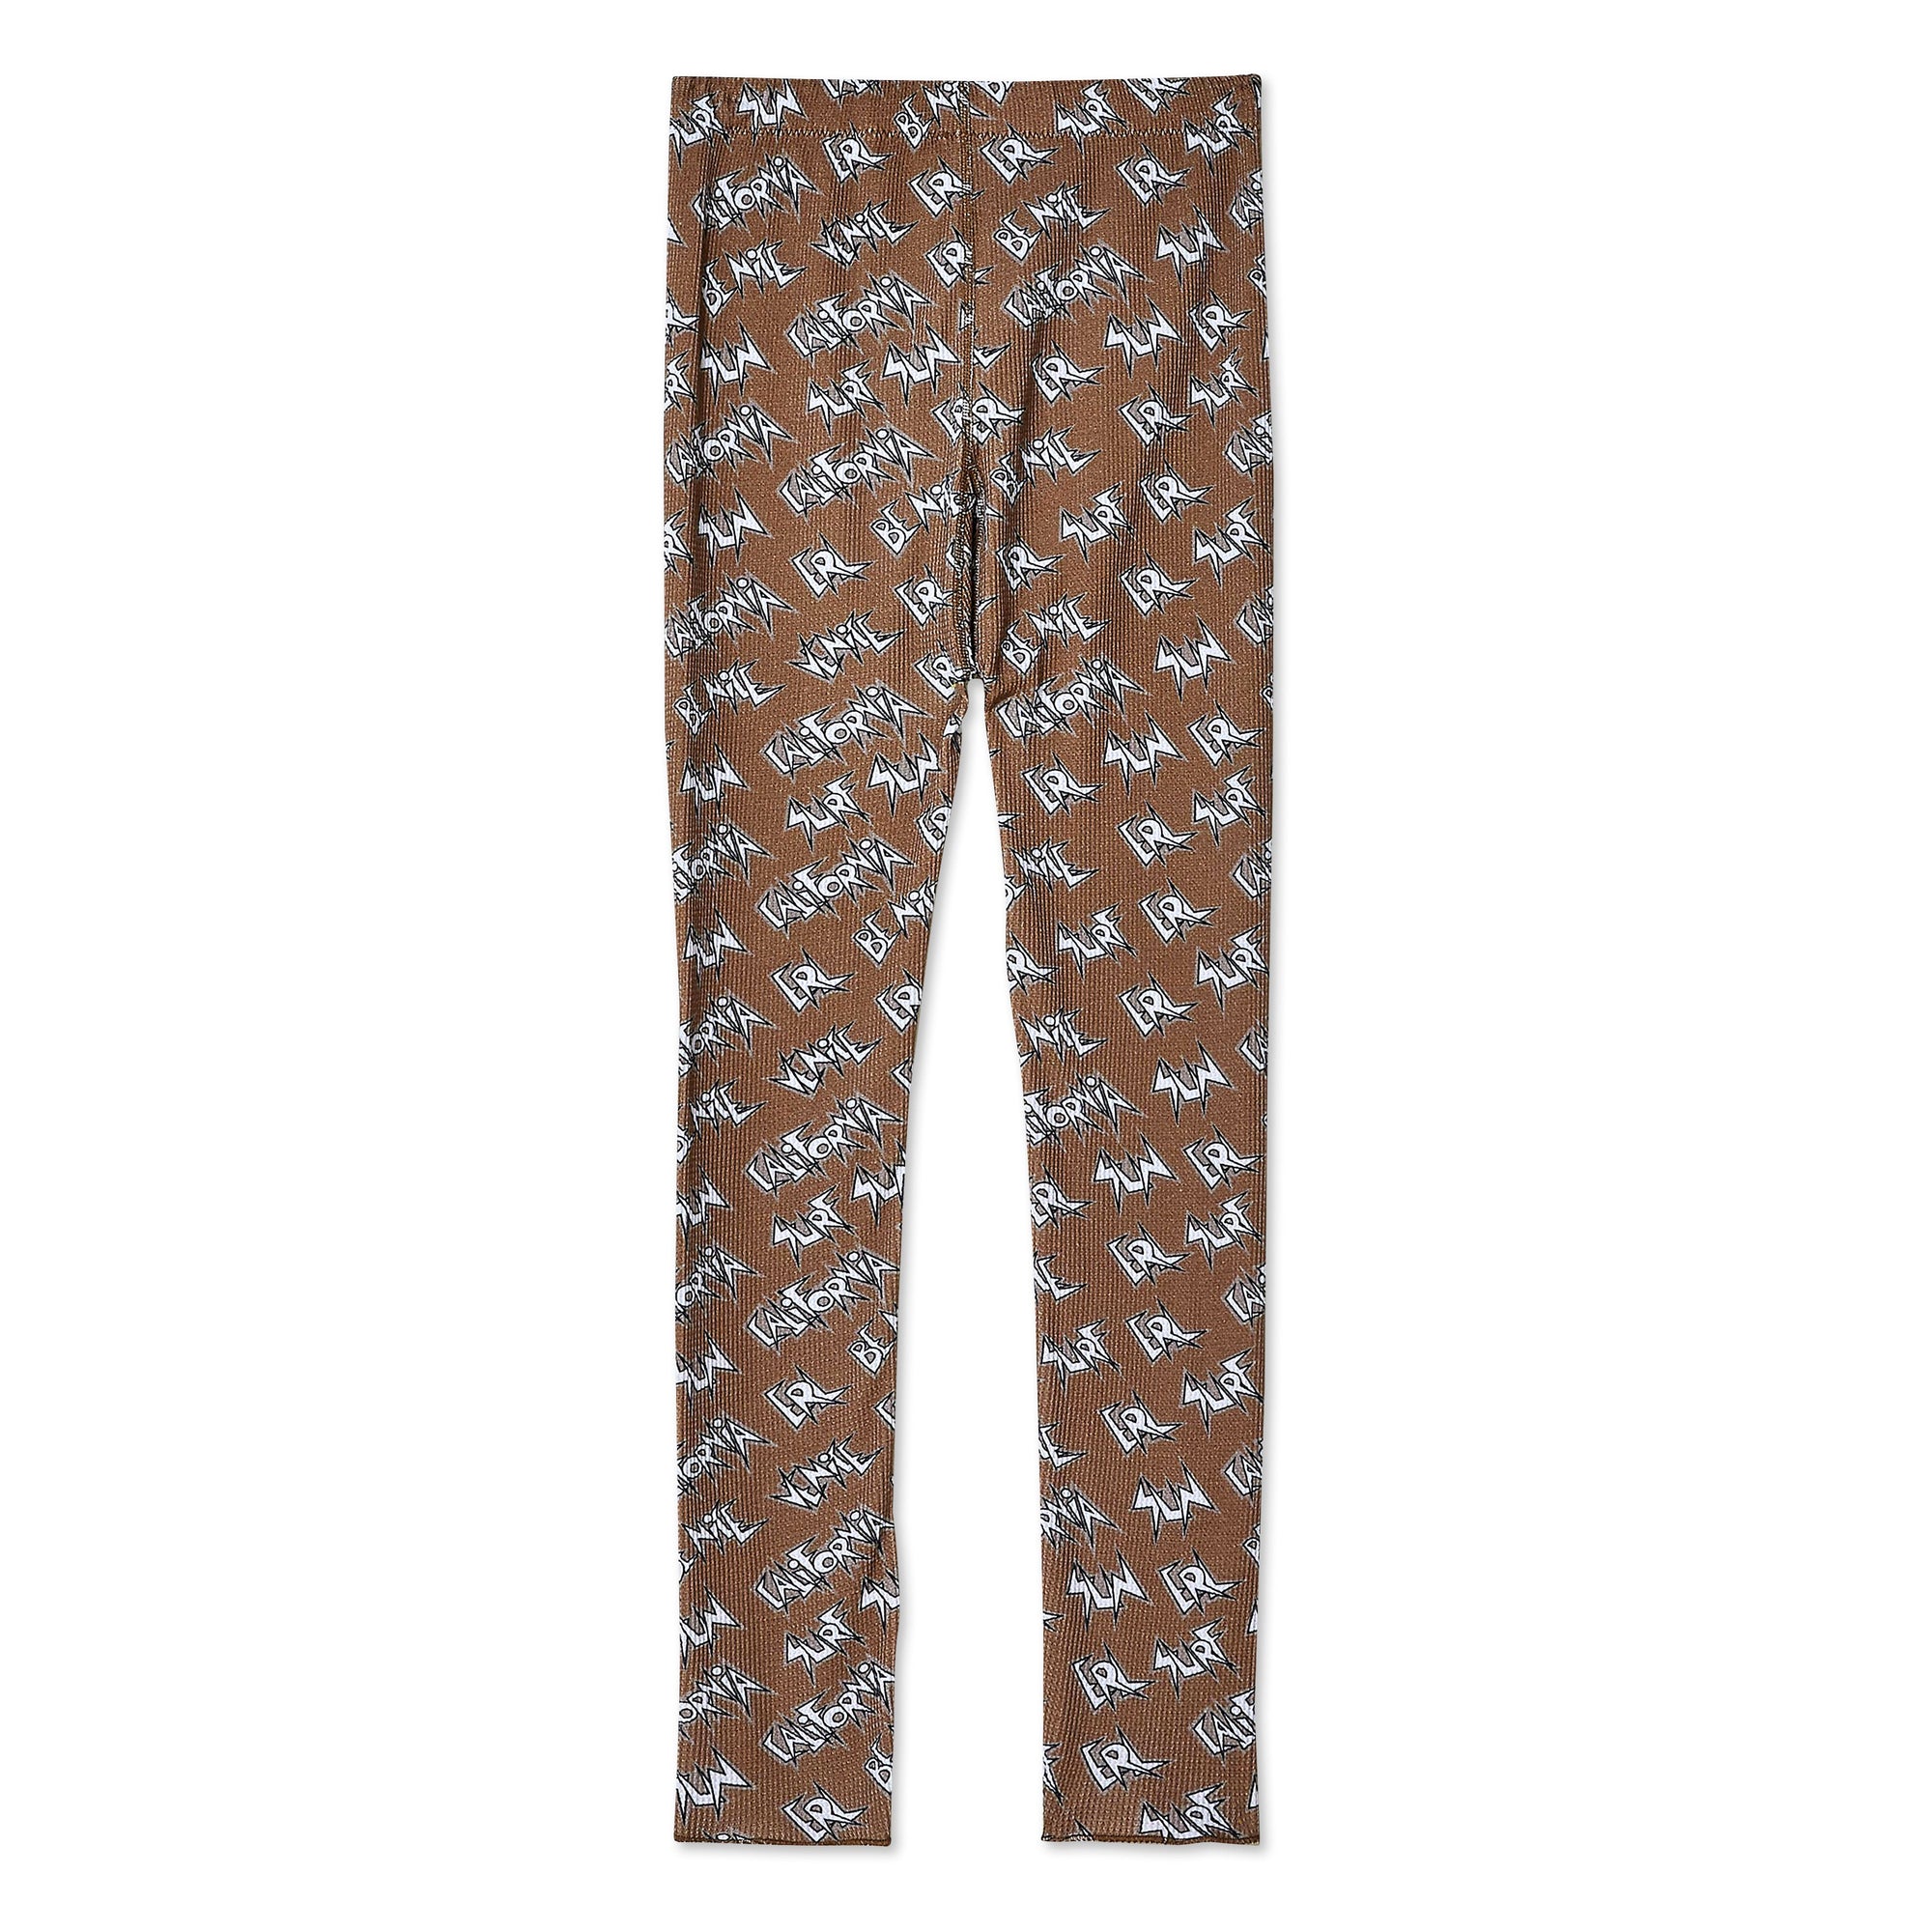 ERL - Men's Printed Waffle Long Johns - (Brown) view 2